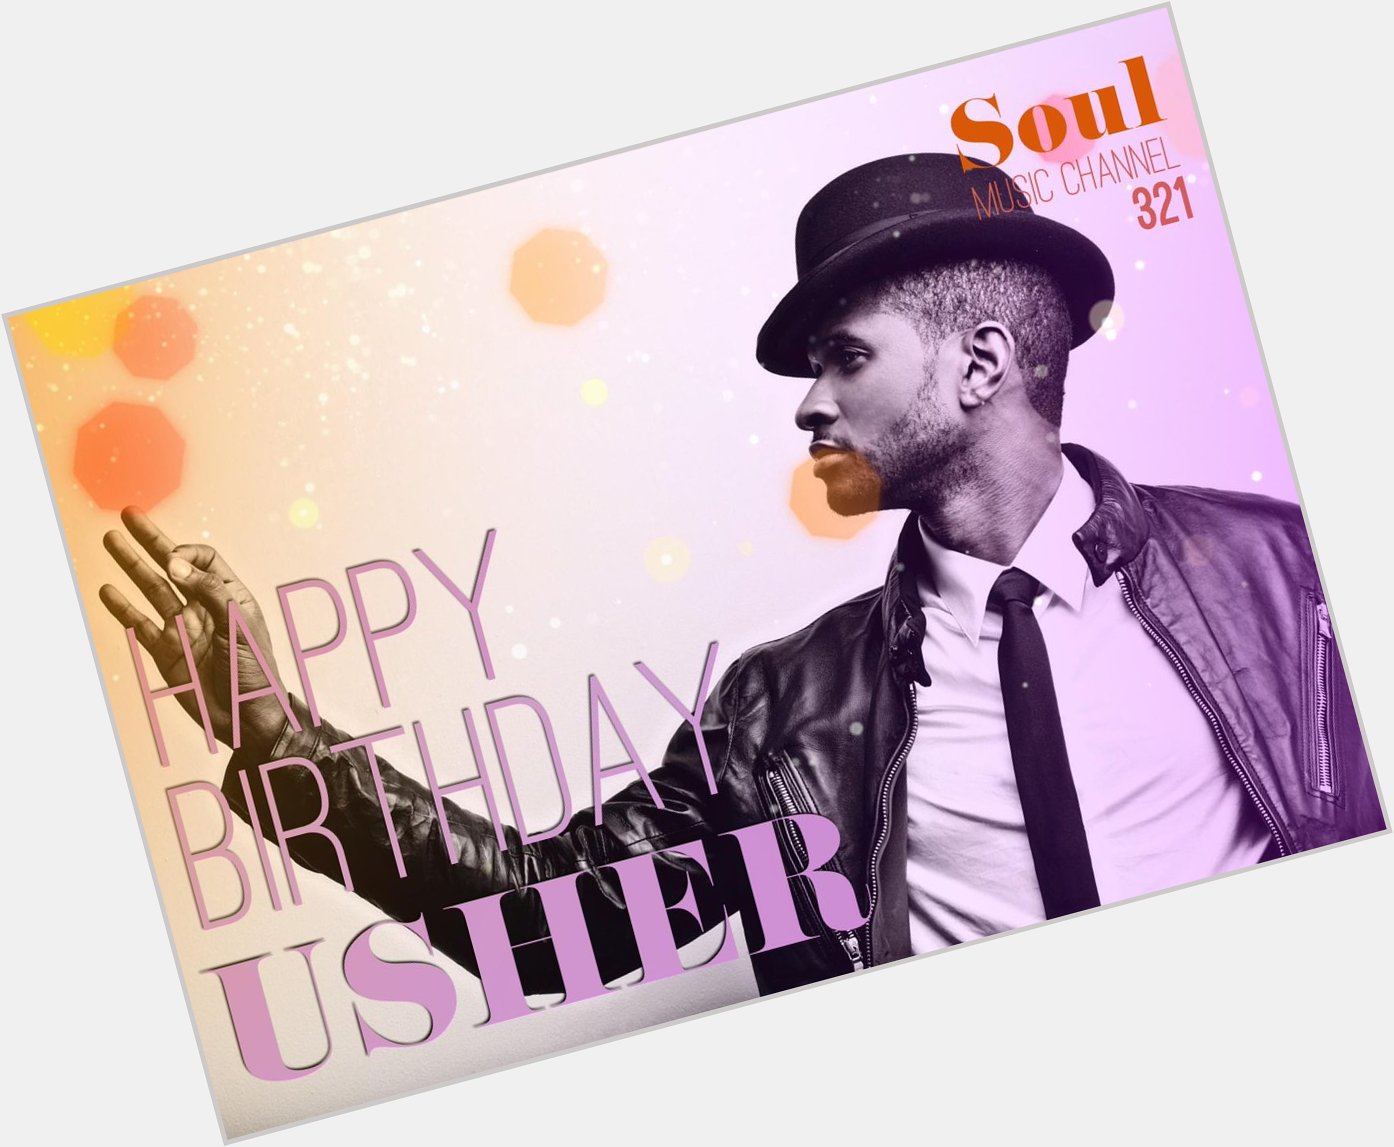 Happy Birthday to R&B singer Usher! His album Confessions became the fastest-selling R&B album in history. 